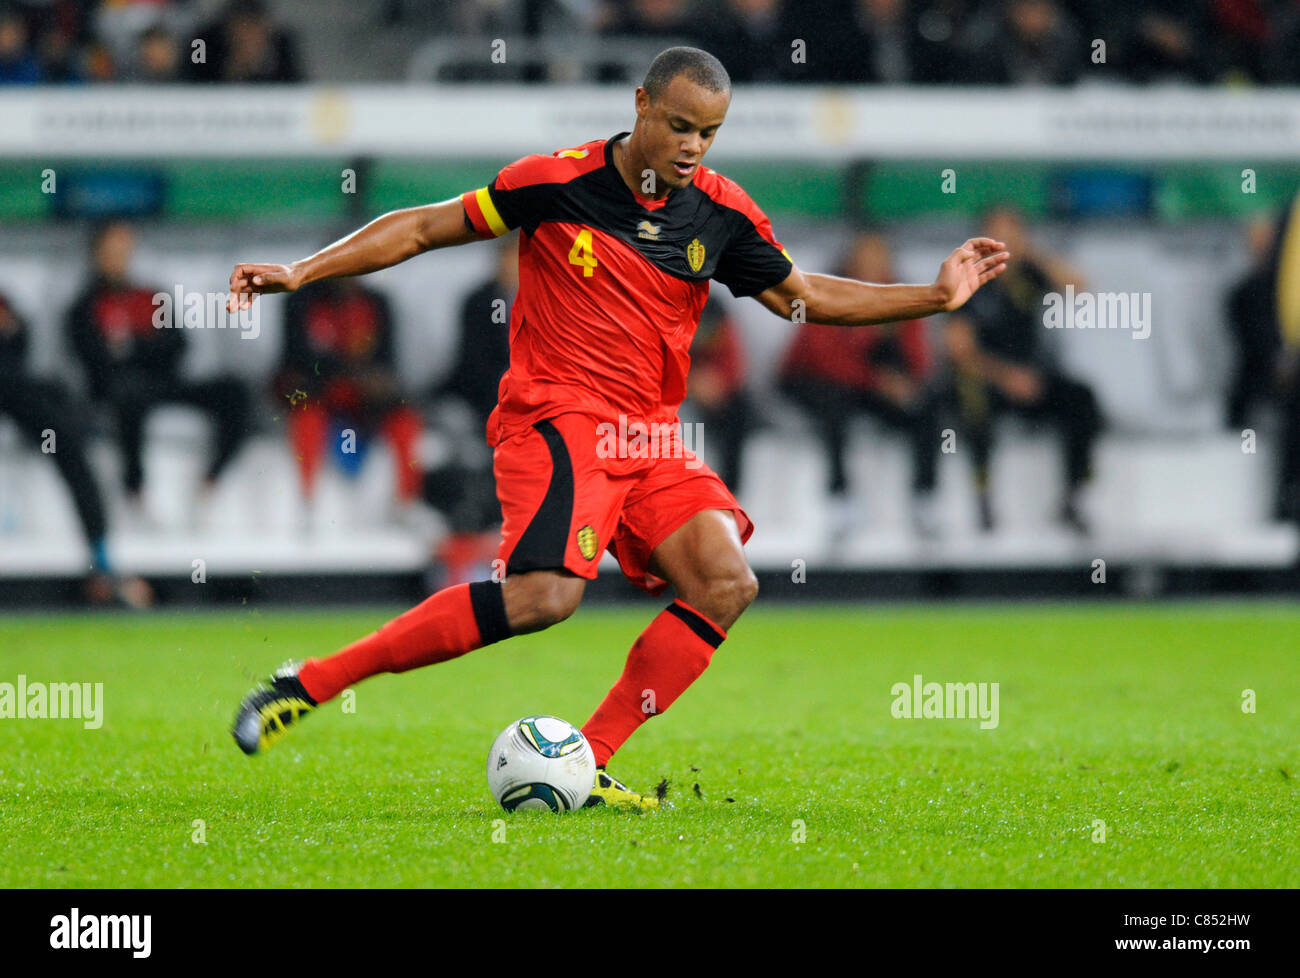 Qualification match for the European Football Championship in Poland and Ukraine 2012; Germany vs Belgium 3:1, at the Esprit Arena in Duesseldorf, Germany: Vincent Kompany (Belgium, Manchester City). Stock Photo